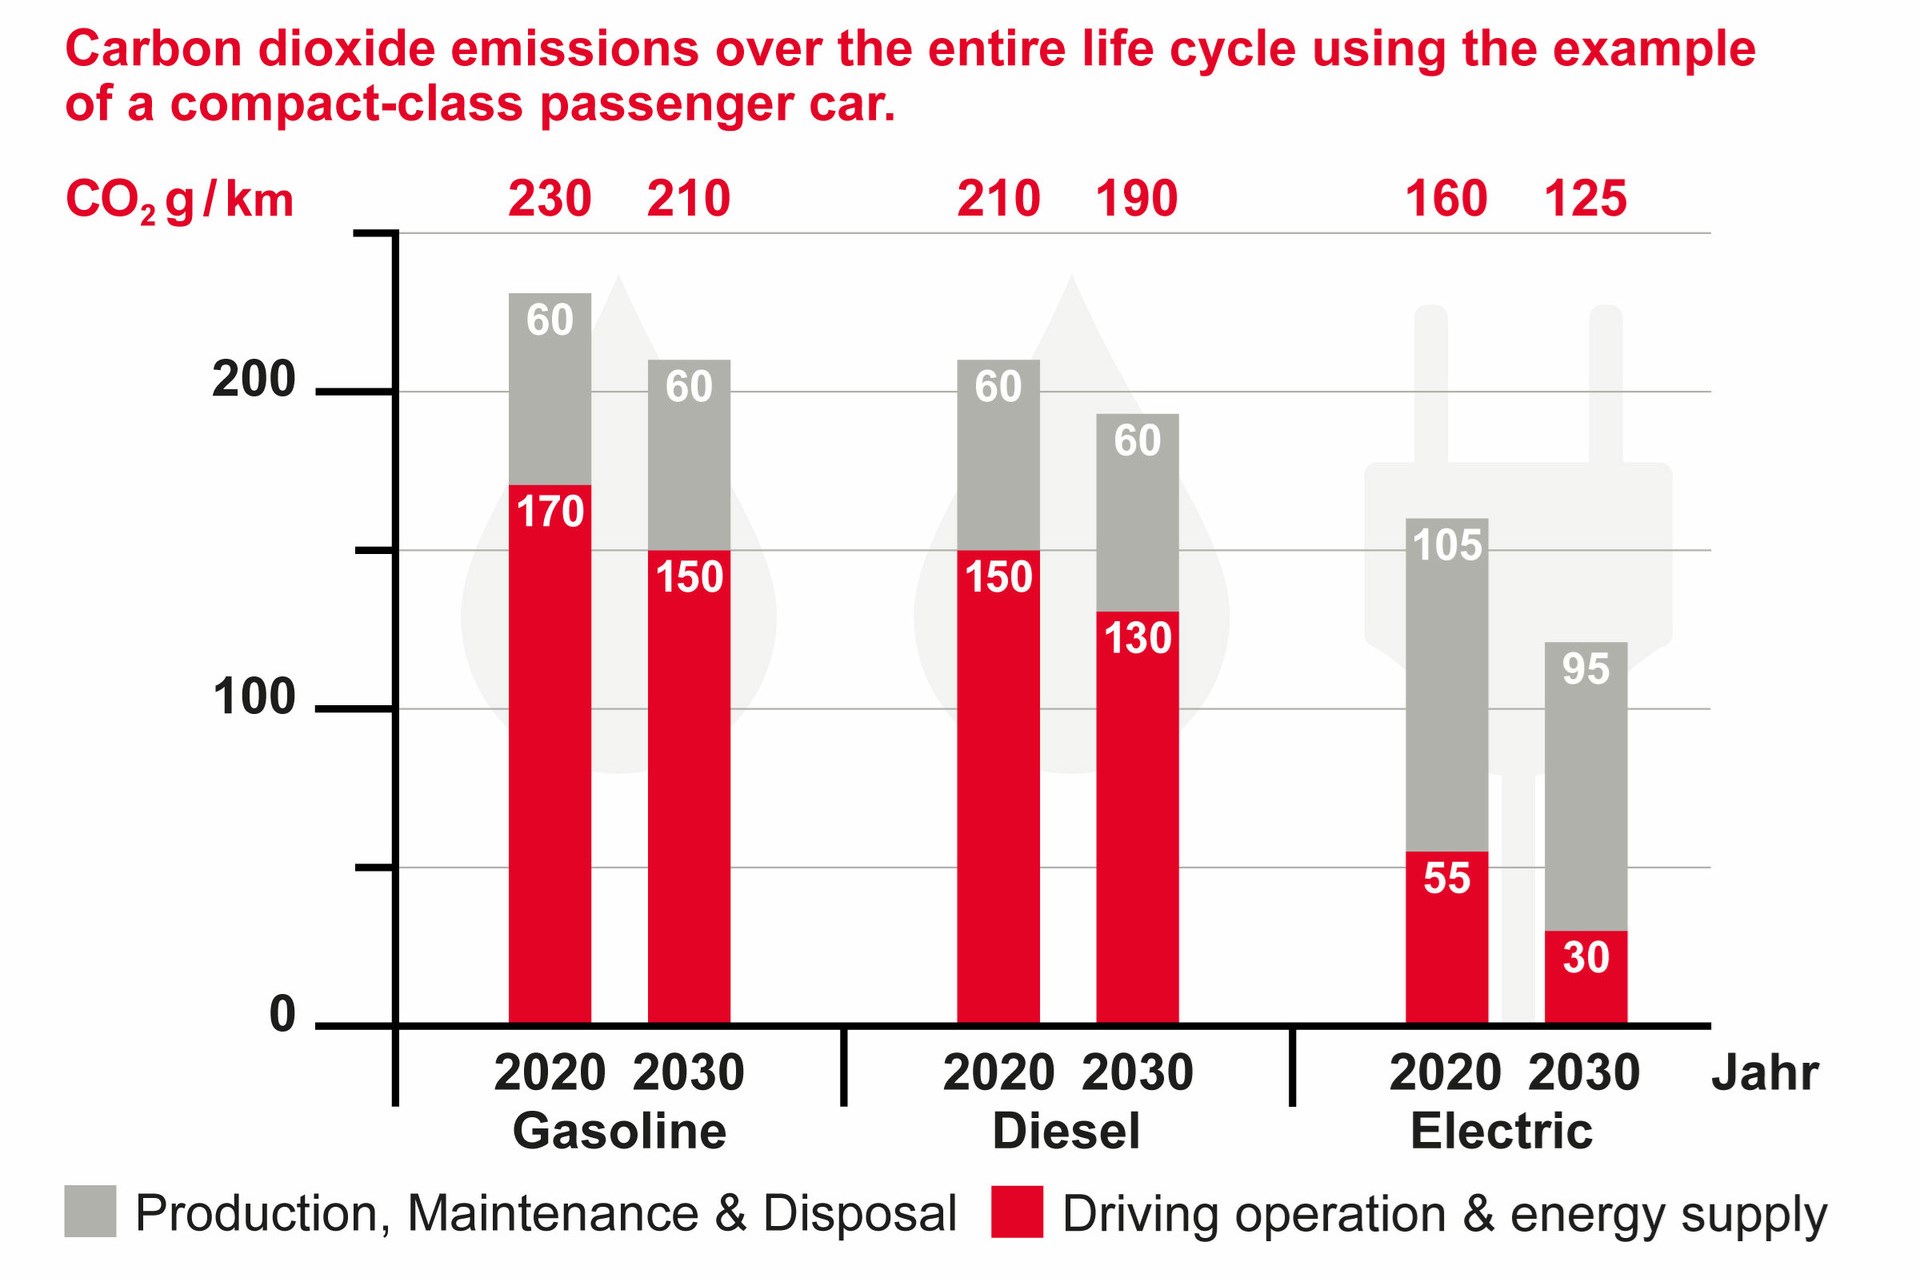 Diagram about carbon dioxide emissions over the entire life cycle using the example of a compact-class passenger car.